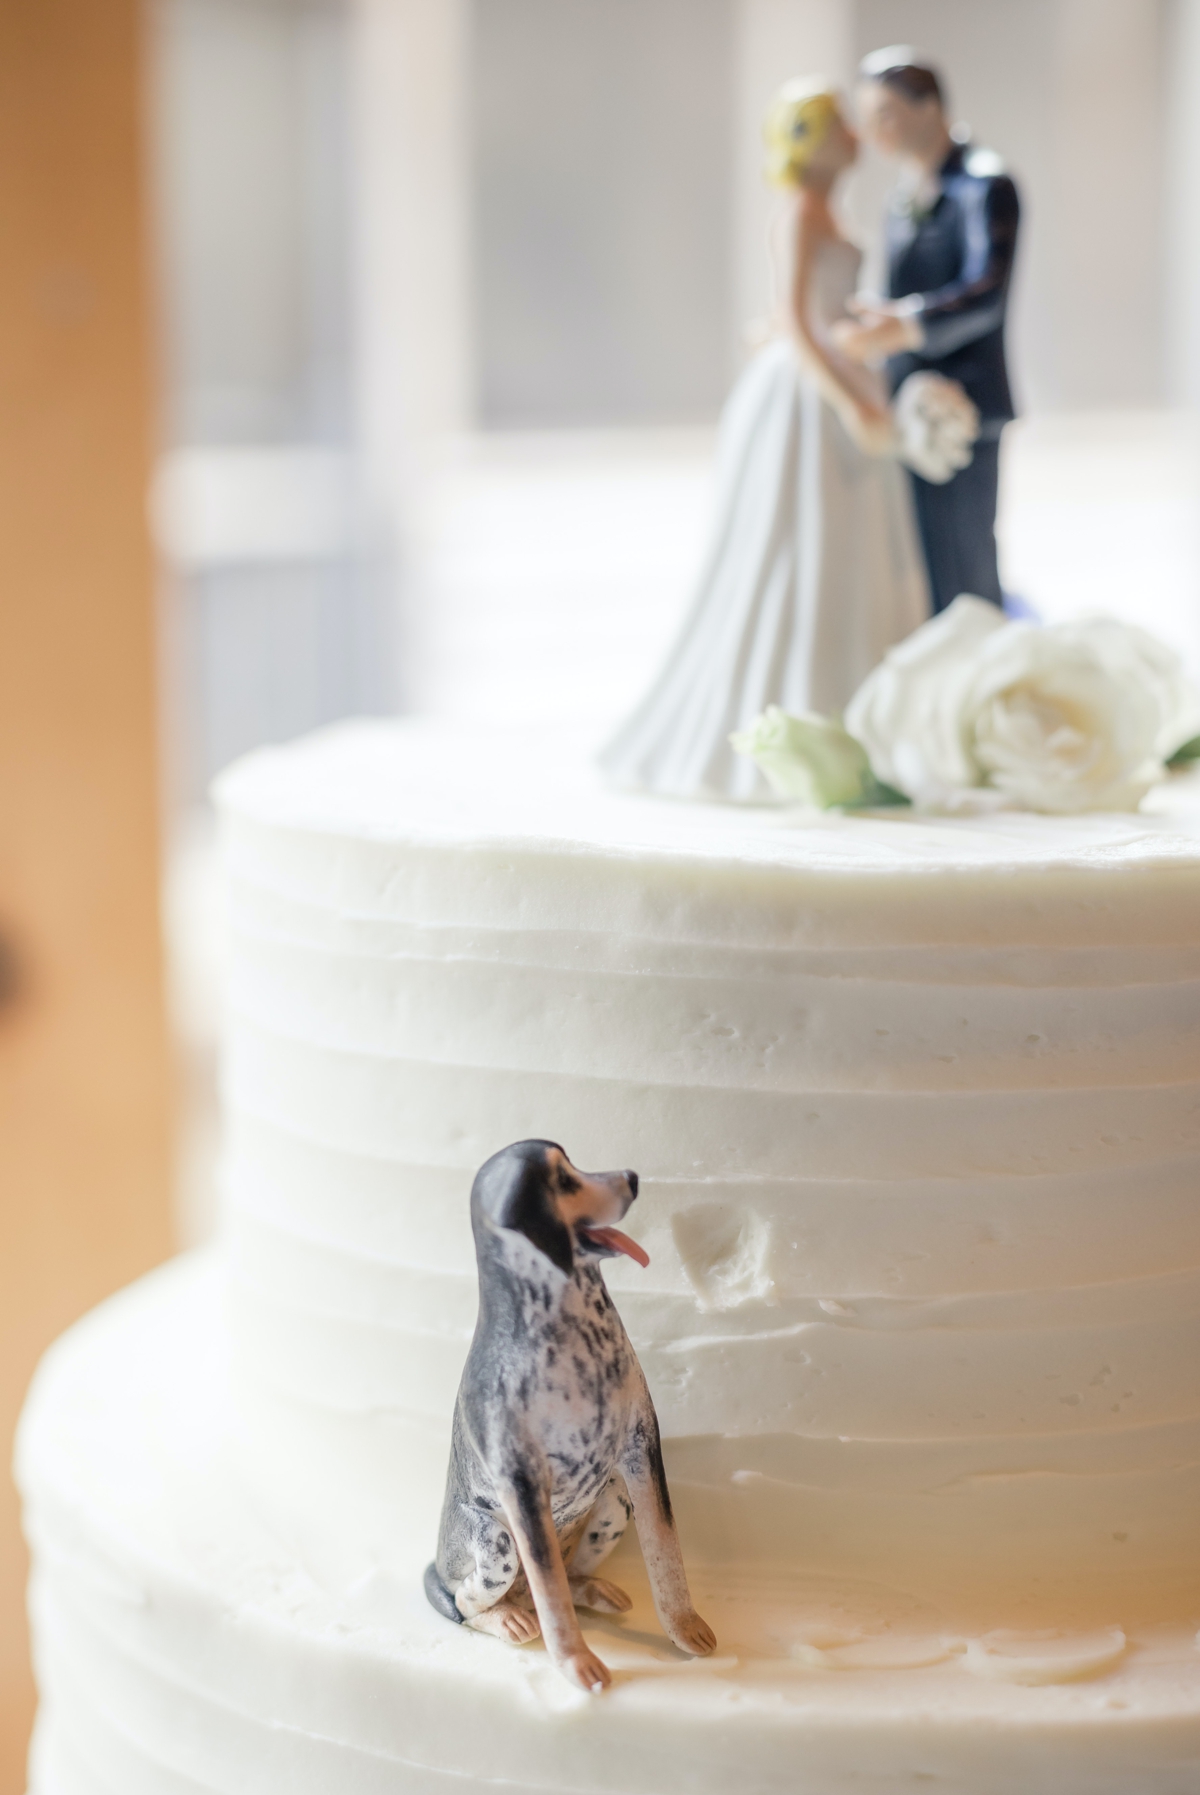 Detail photo of a dog figurine taking a bit out of the wedding cake and the cake topper of the bride and groom kissing for Chris and Grace's wedding day.